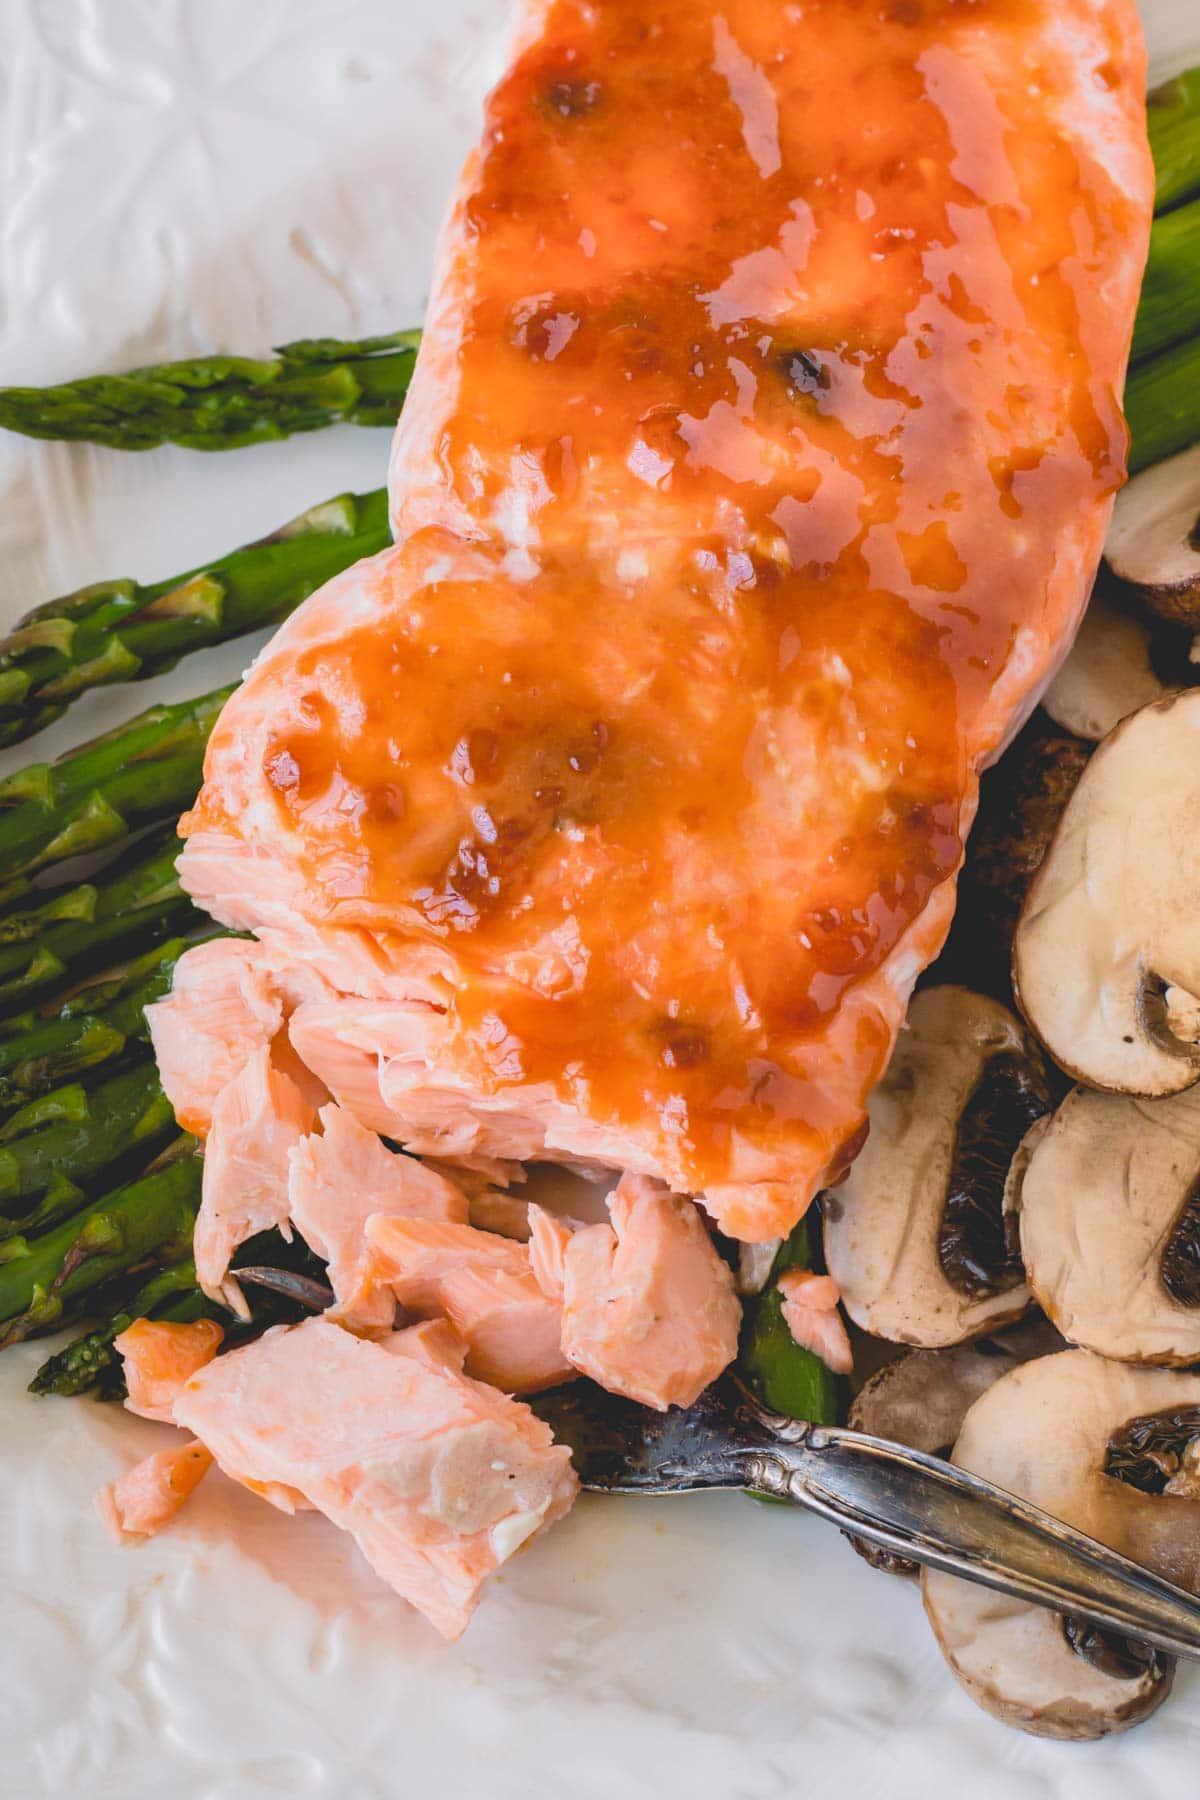 Flaked baked salmon over asparagus and mushrooms